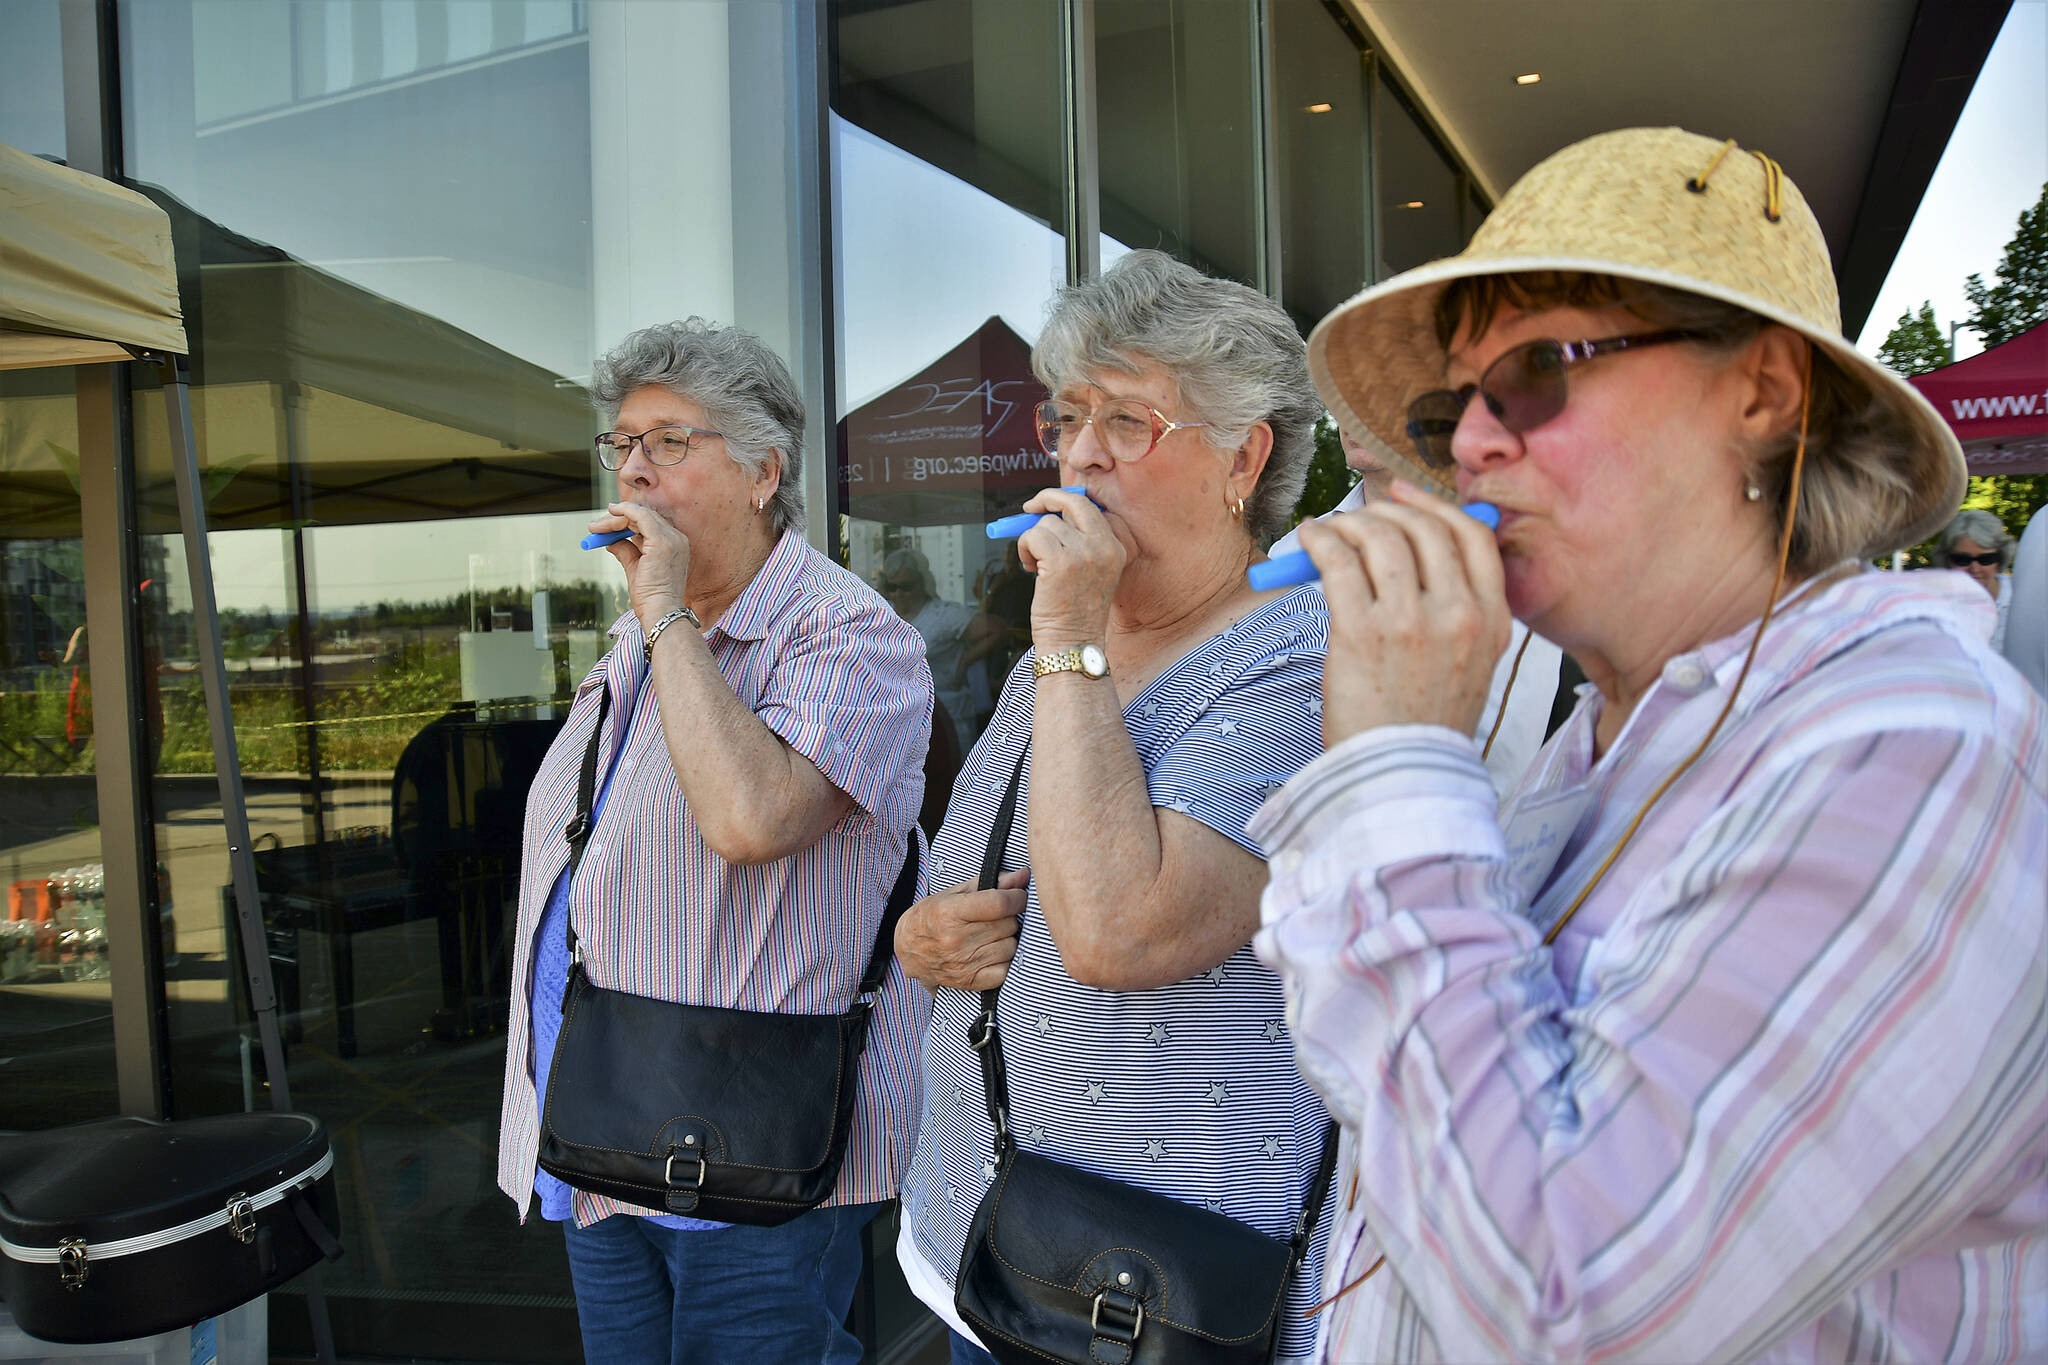 Attendees of the June 21, 2021, Make Music Federal Way event play kazoos outside of the Federal Way Performing Arts and Event Center. Photo courtesy of Bruce Honda